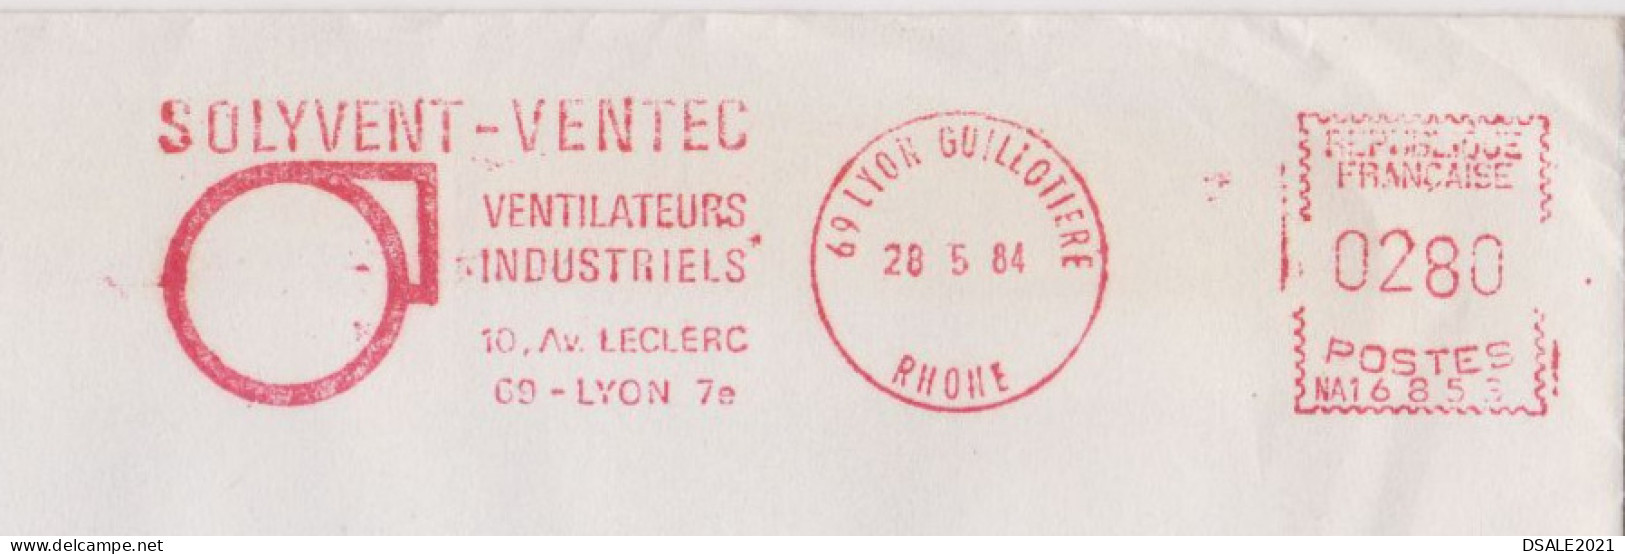 France 1984 Airmail Window Cover With Advertising Machine EMA METER Stamp Cachet, Sent Abroad (66860) - Covers & Documents